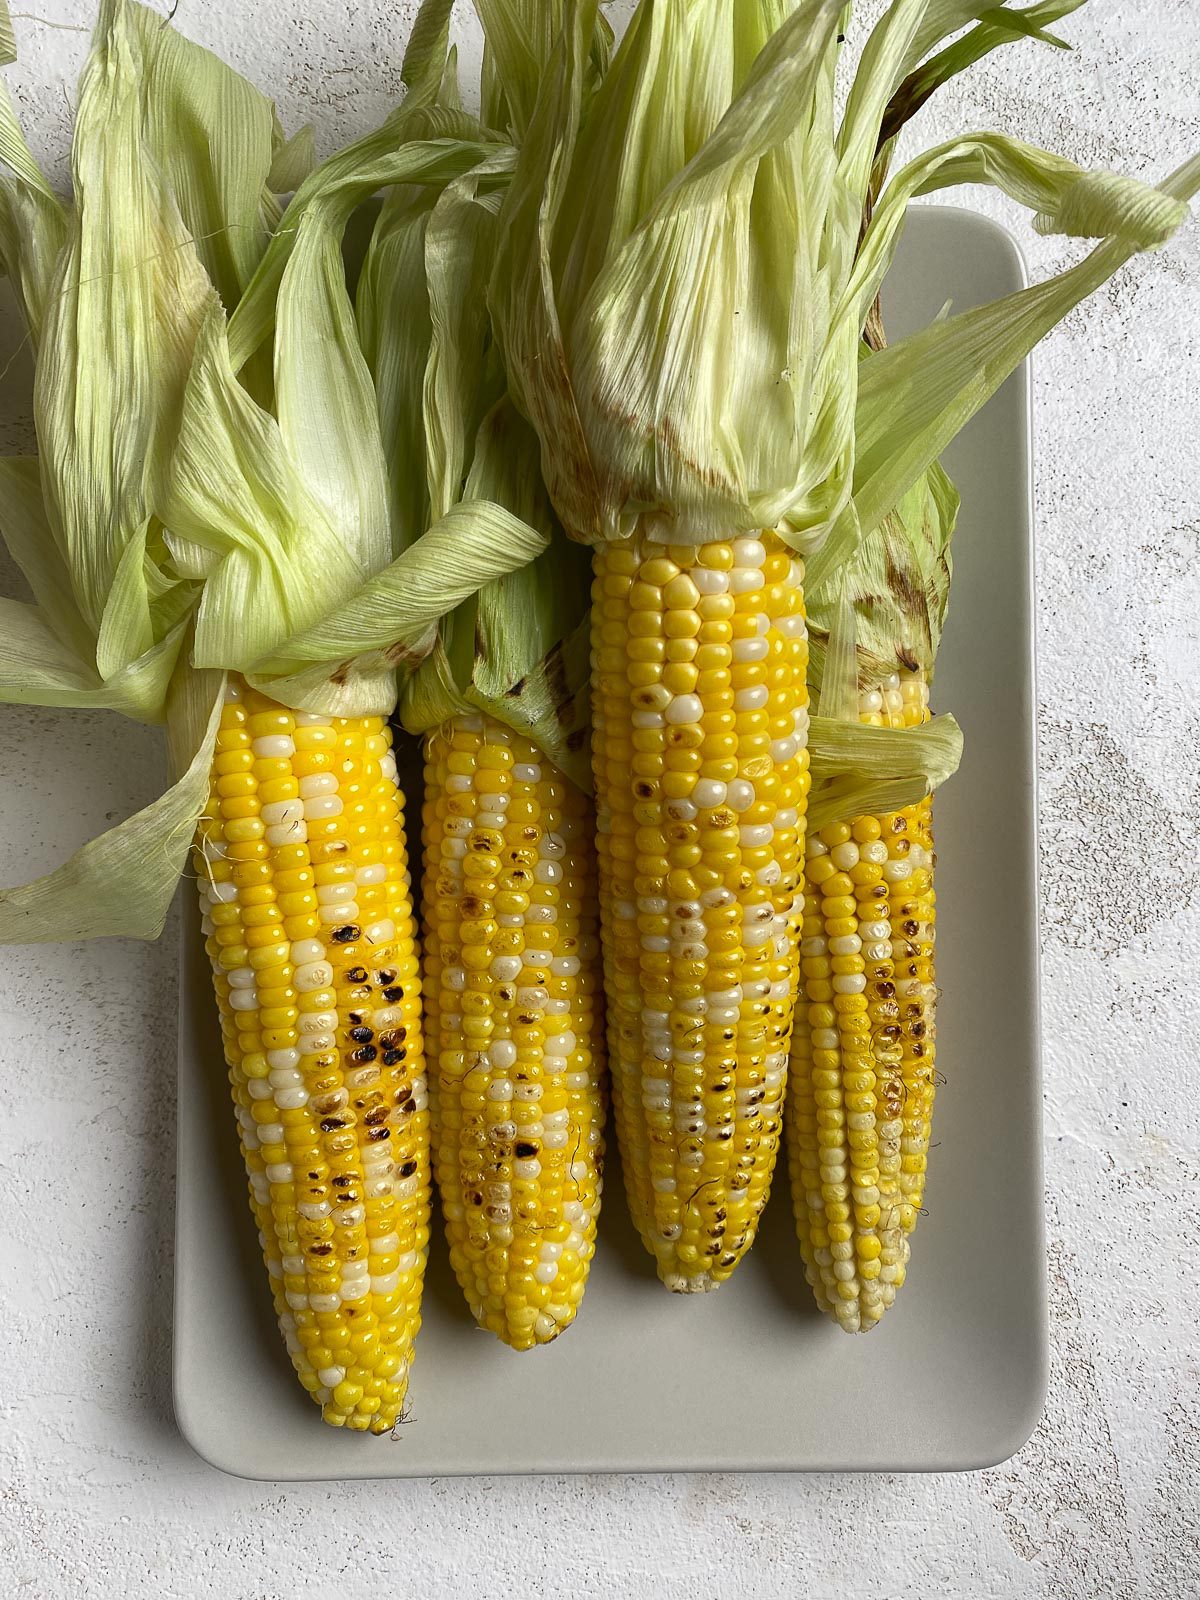 four cobs of corn on a light dish